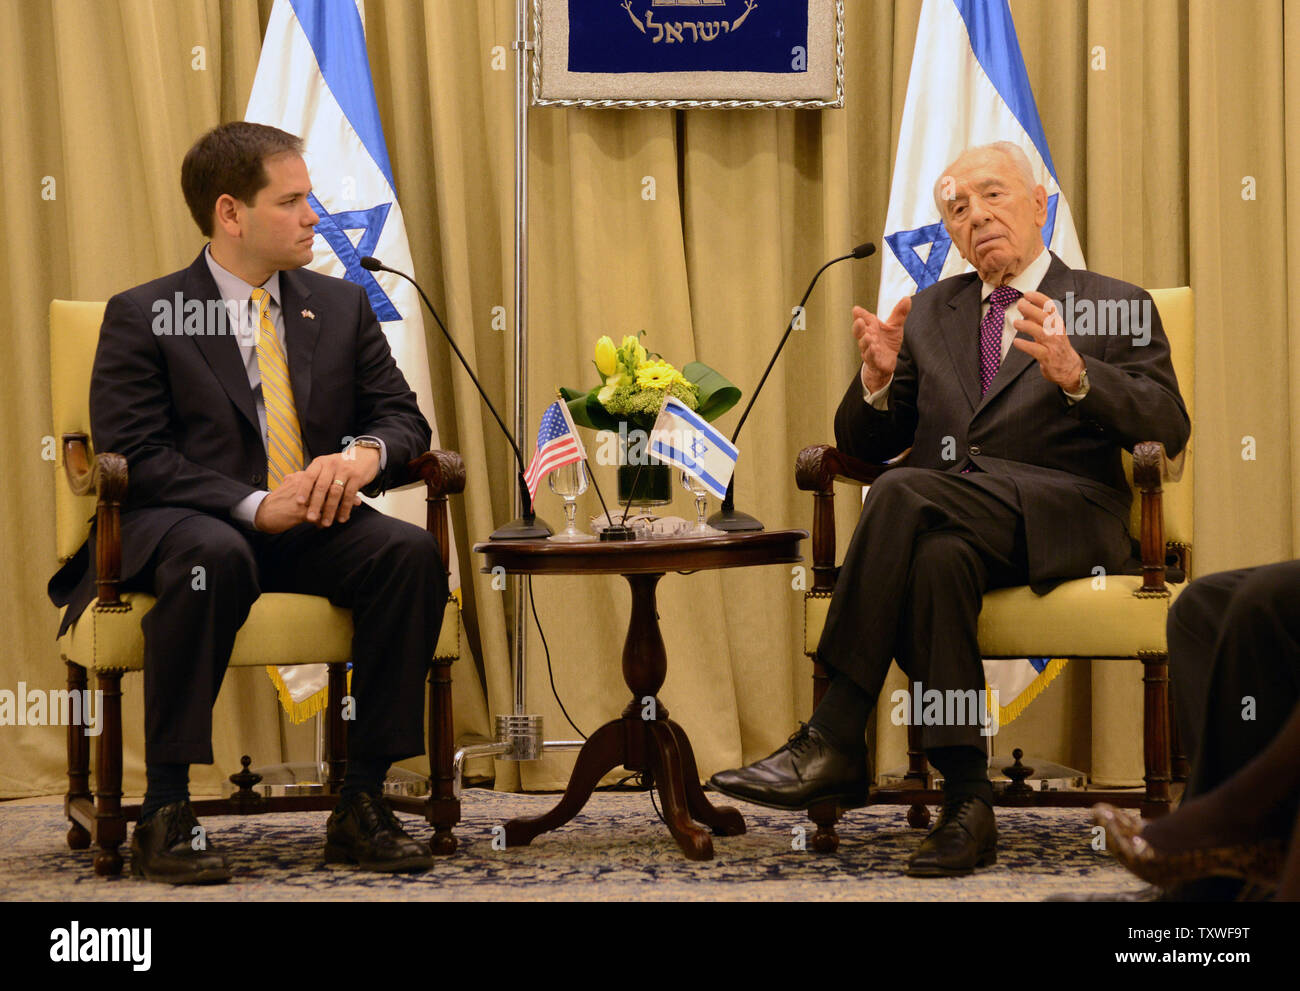 Sen. Marco Rubio (R-FL) (L) speaks with Israeli President Shimon Peres (R) before a diplomatic work meeting, February 20, 2013, at Peres' residence in Jerusalem, Israel.  UPI/Debbie Hill. Stock Photo